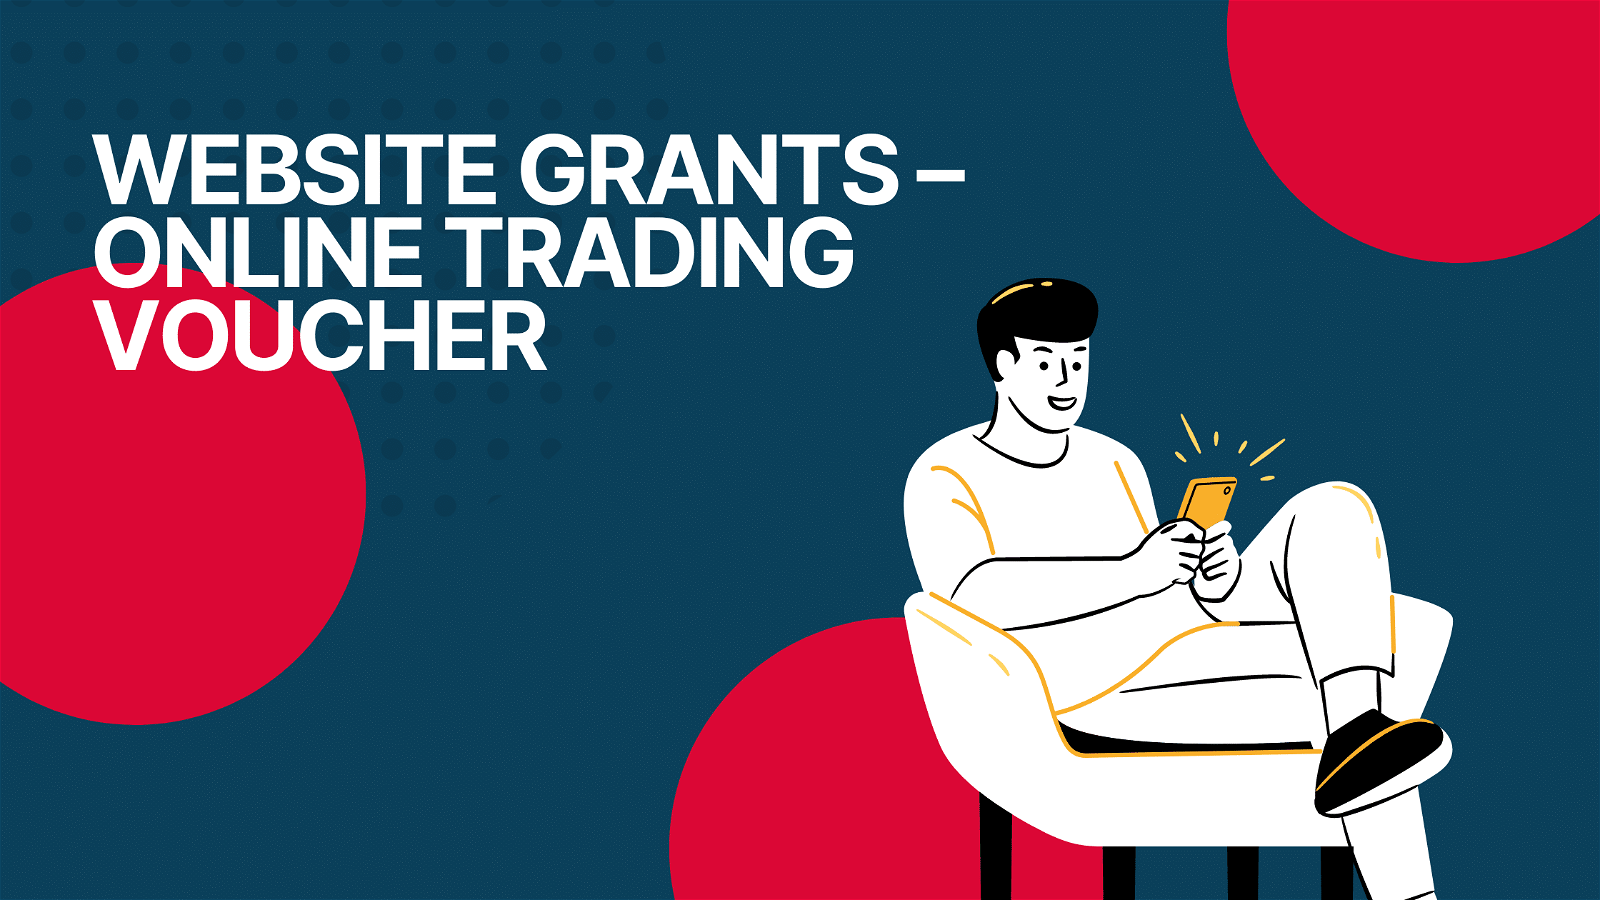 This image is showing a website offering online trading vouchers as a grant.